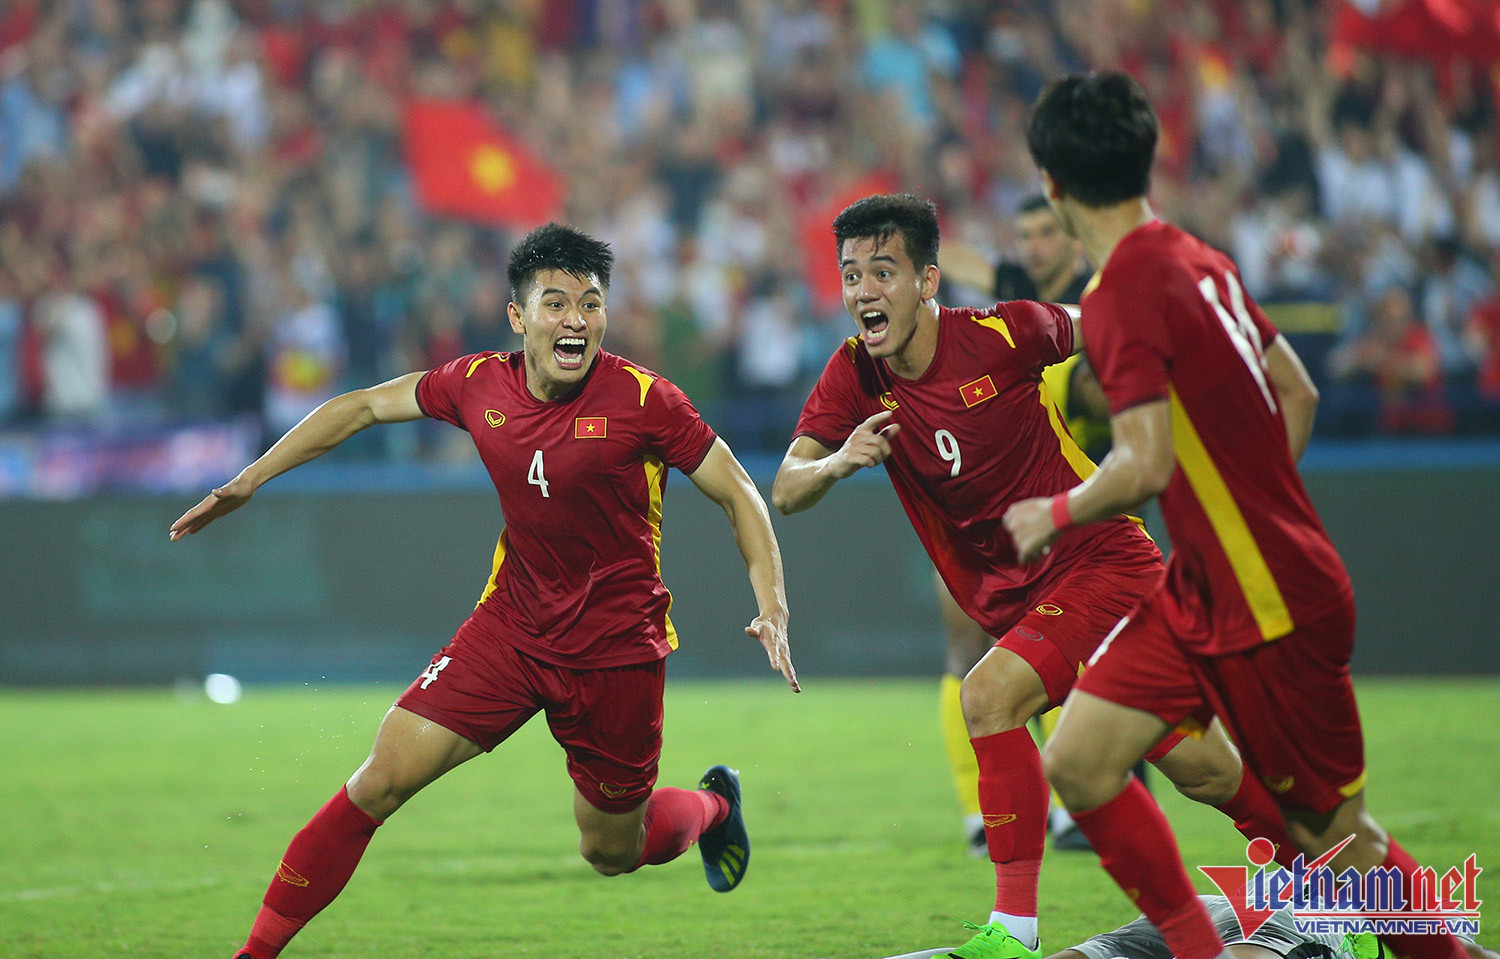 Value of Vietnamese national football team hits record high